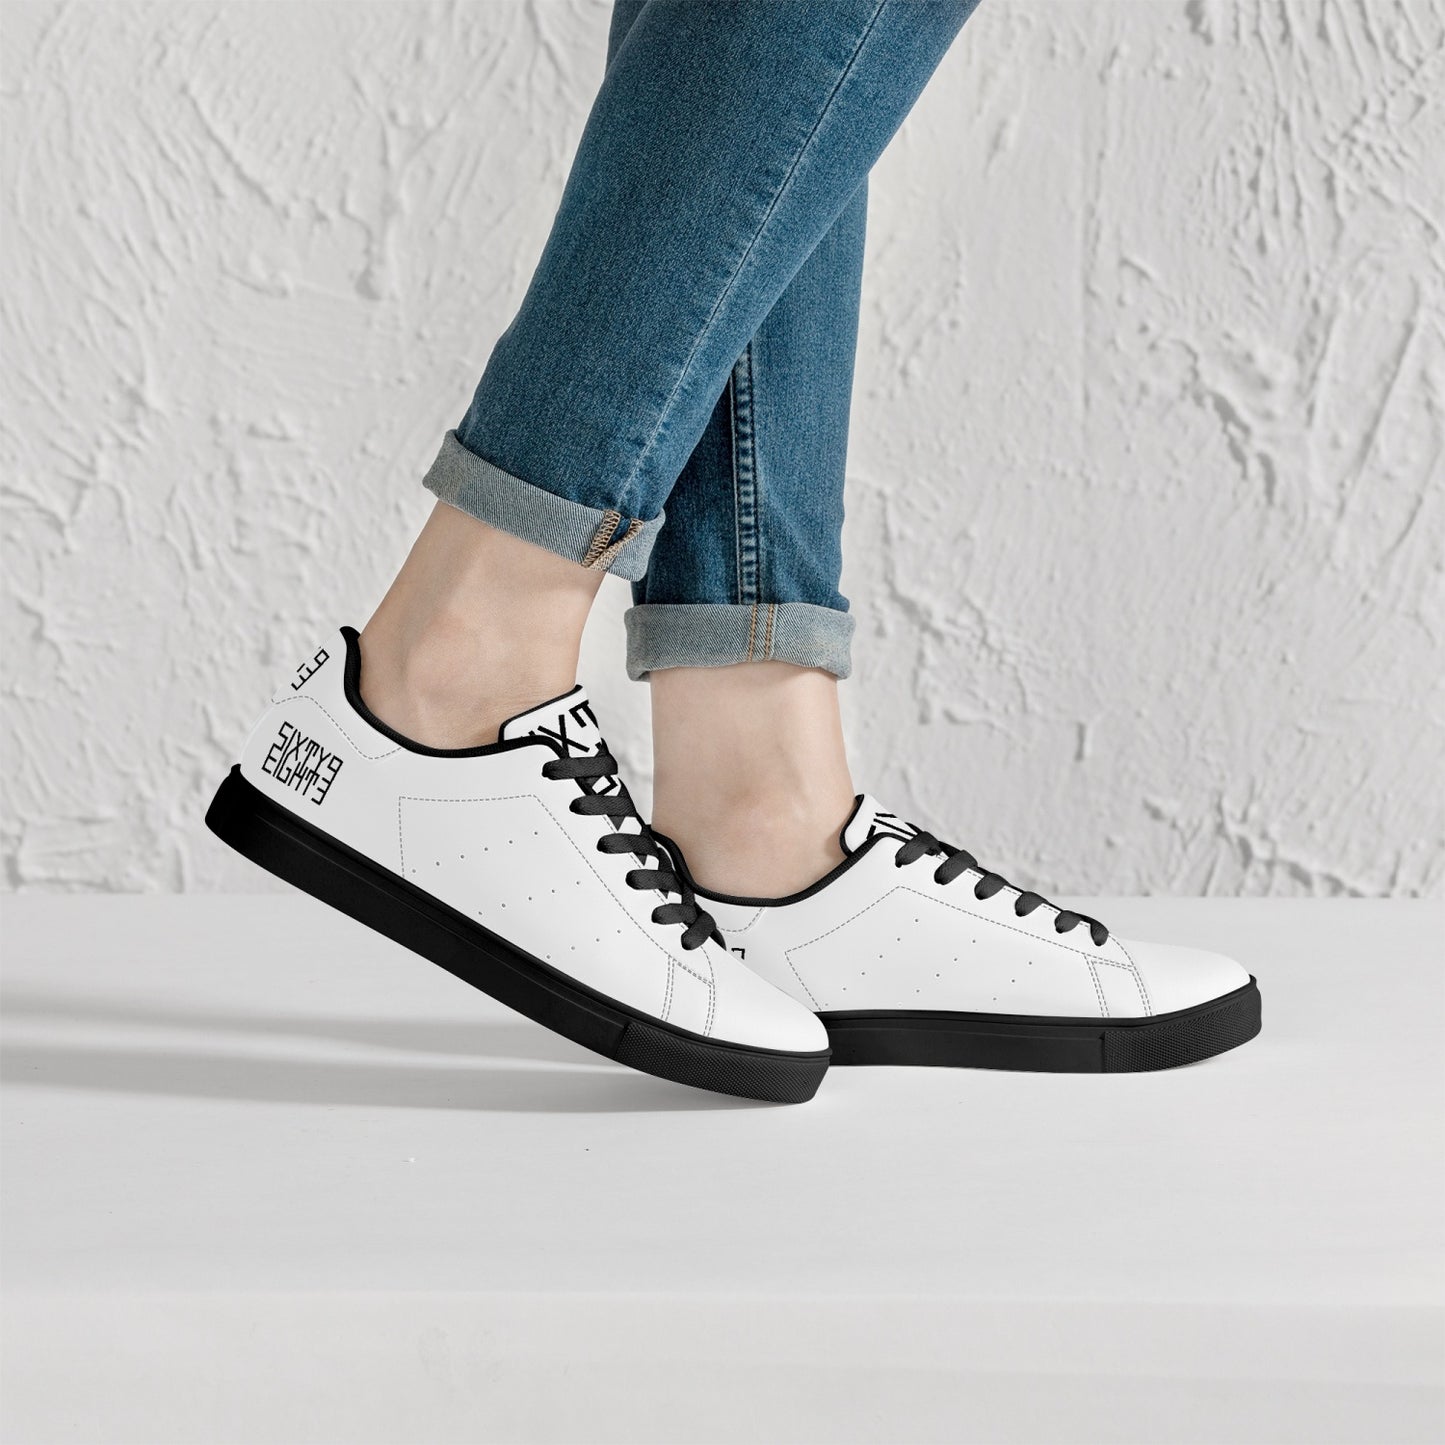 Sixty Eight 93 Logo Black White Classic Low-Top Leather Shoes